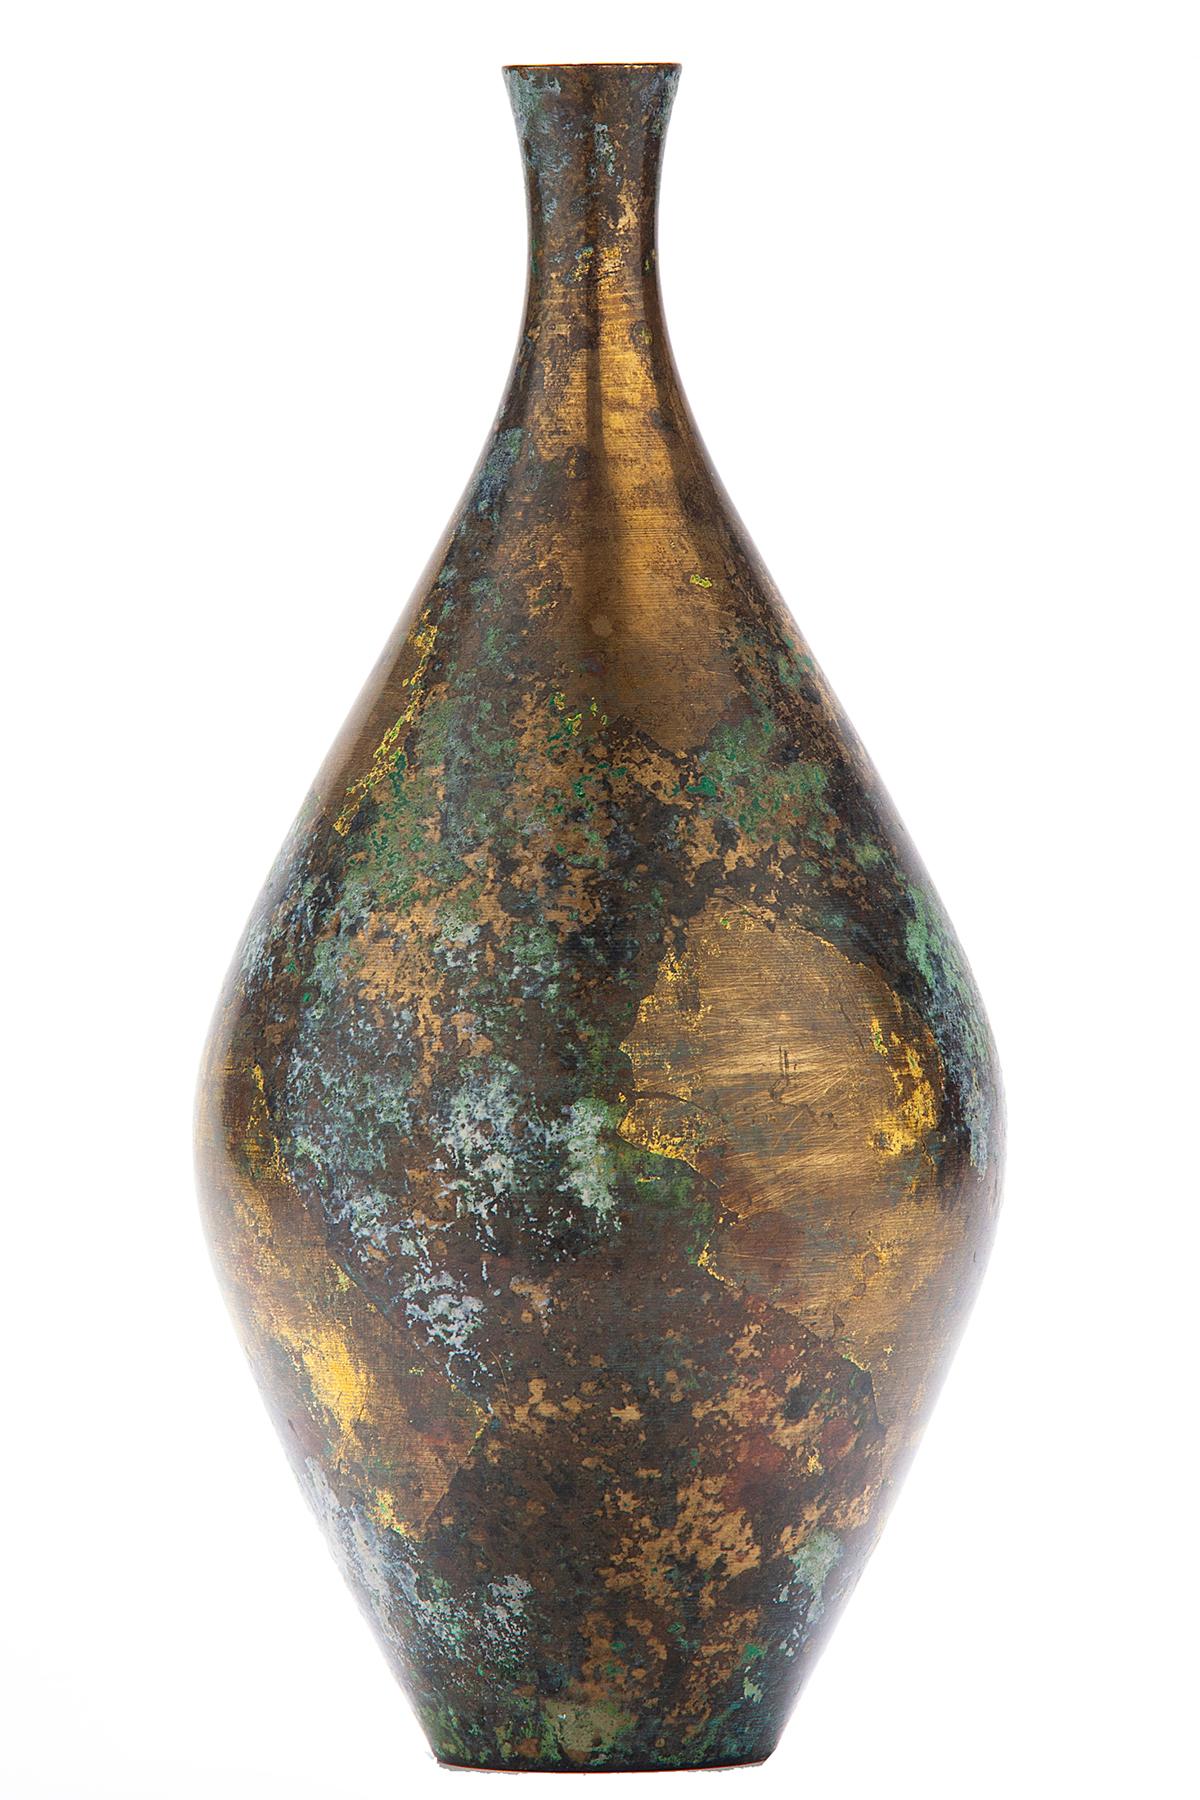 Vintage Japanese bronze Bud vase with dramatic form & color.
The finish created with chemical etching and metal leaf.
Excellent condition, no dents dings or other damages.